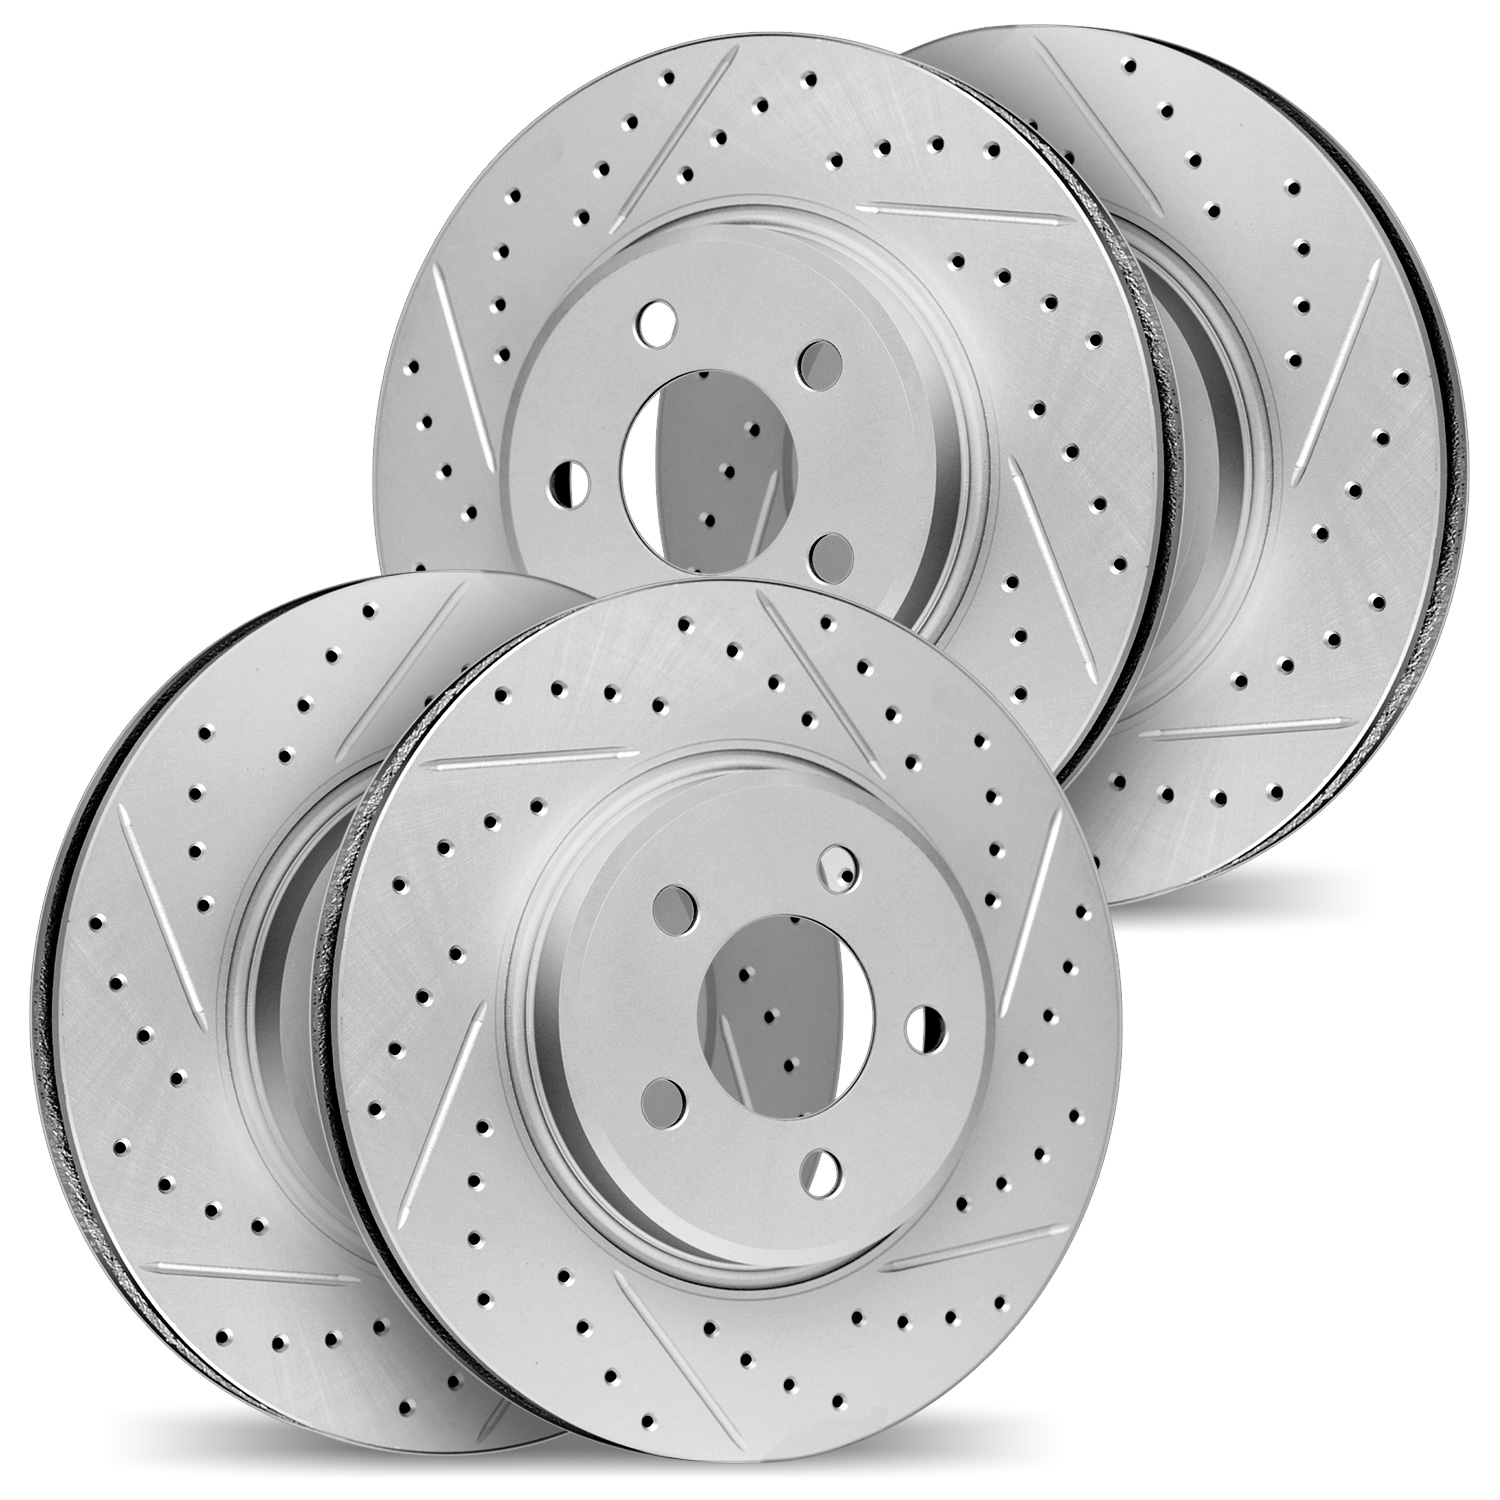 2004-31070 Geoperformance Drilled/Slotted Brake Rotors, 2010-2011 BMW, Position: Front and Rear